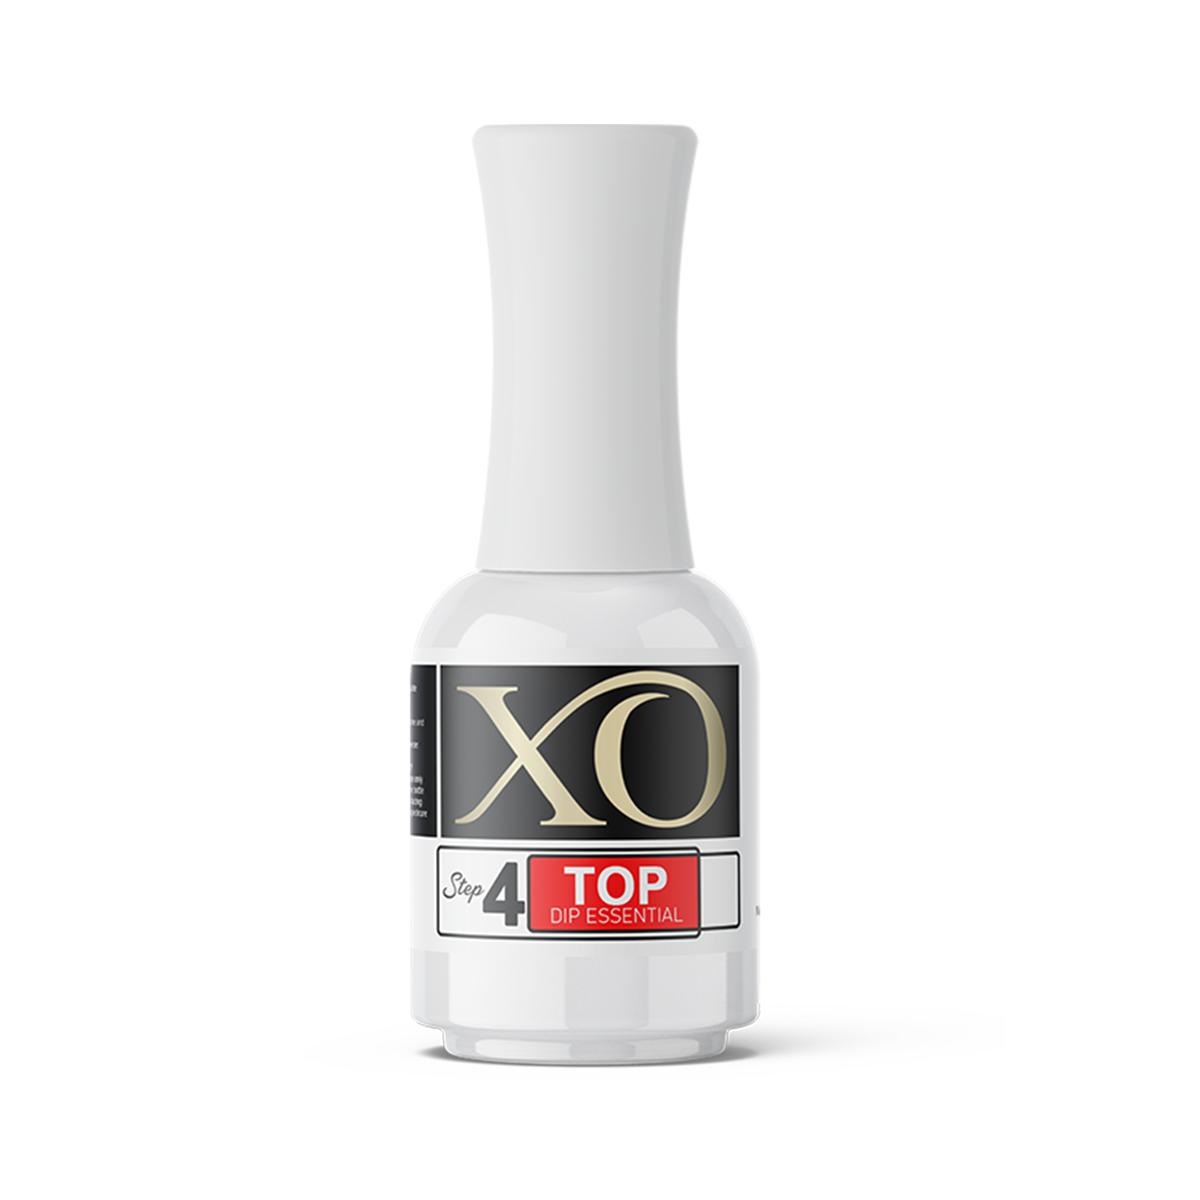 XO Dipping Essential - Top Dip (0.5oz/15ml) for Dipping Manicures-Nails Deal & Beauty Supply- Nail Supply American Gel Polish - Phuong Ni